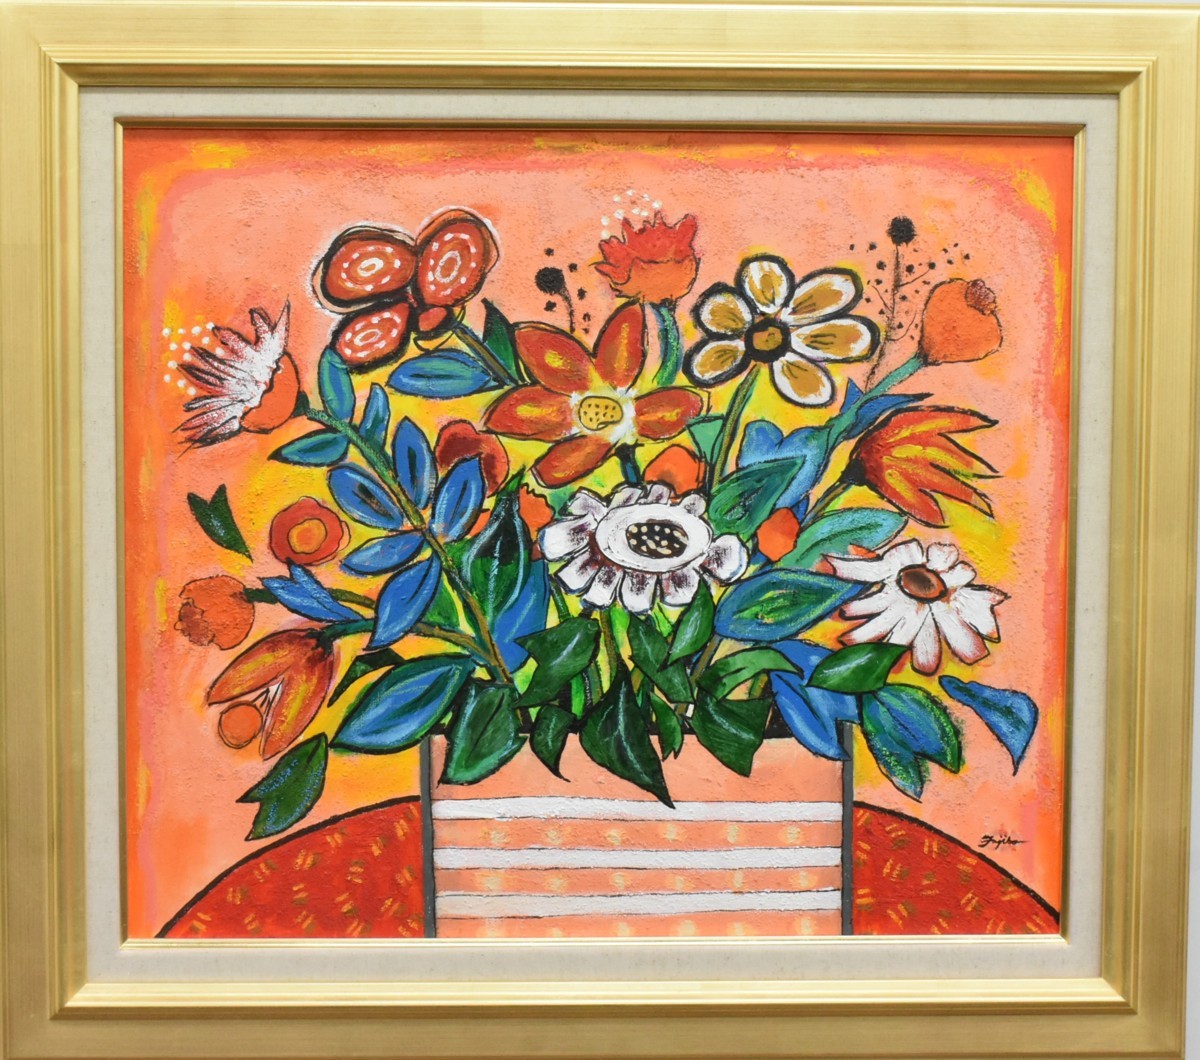 [Masami Gallery] A new oil painting by a popular artist! Fujiko Shirai, No. 10 Bouquet Sent [5, 000 pieces on display! You're sure to find a piece you like], Painting, Oil painting, Still life